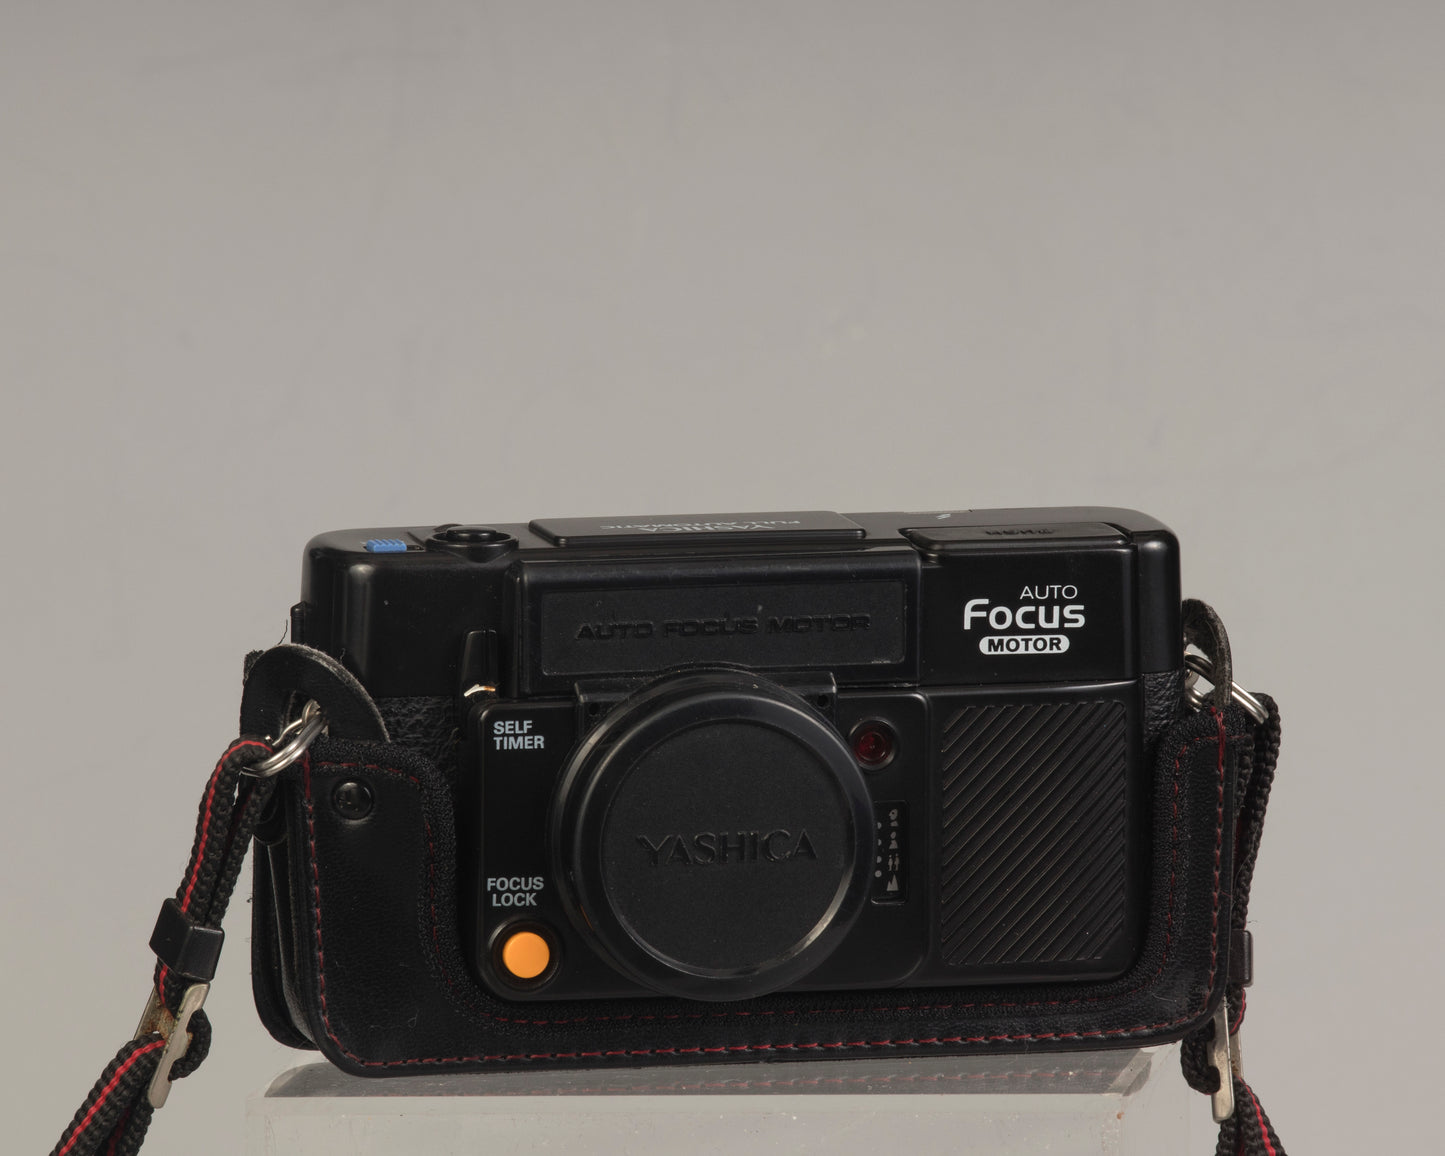 The Yashica Auto Focus Motor (shown with lens cap on) is a classic 35mm point-and-shoot film camera featuring a 38mm f2.8 lens